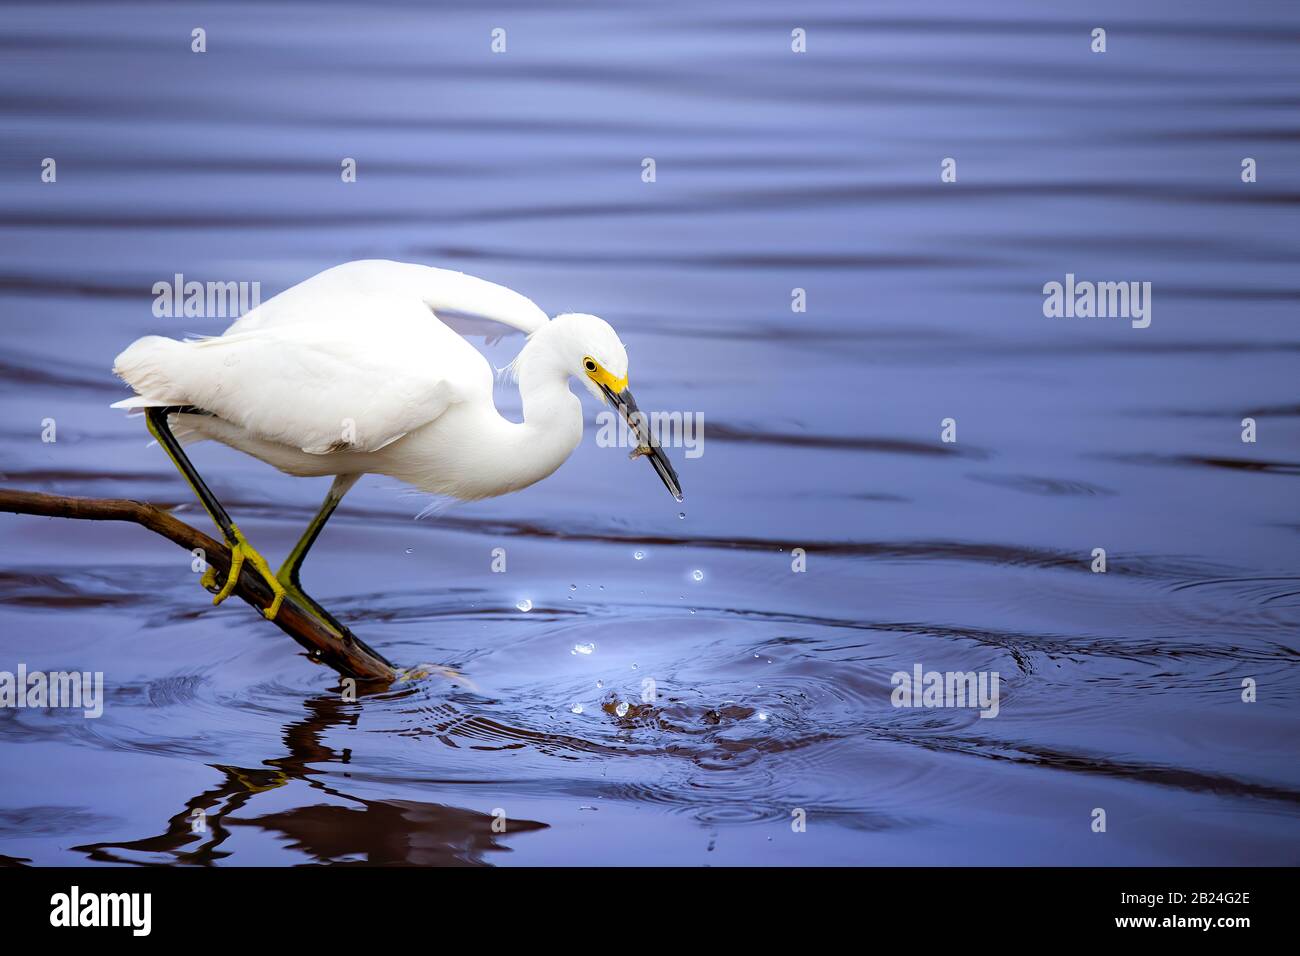 A Snowy Egret catches a small fish at Mrazek Pond in Everglades National Park. Stock Photo